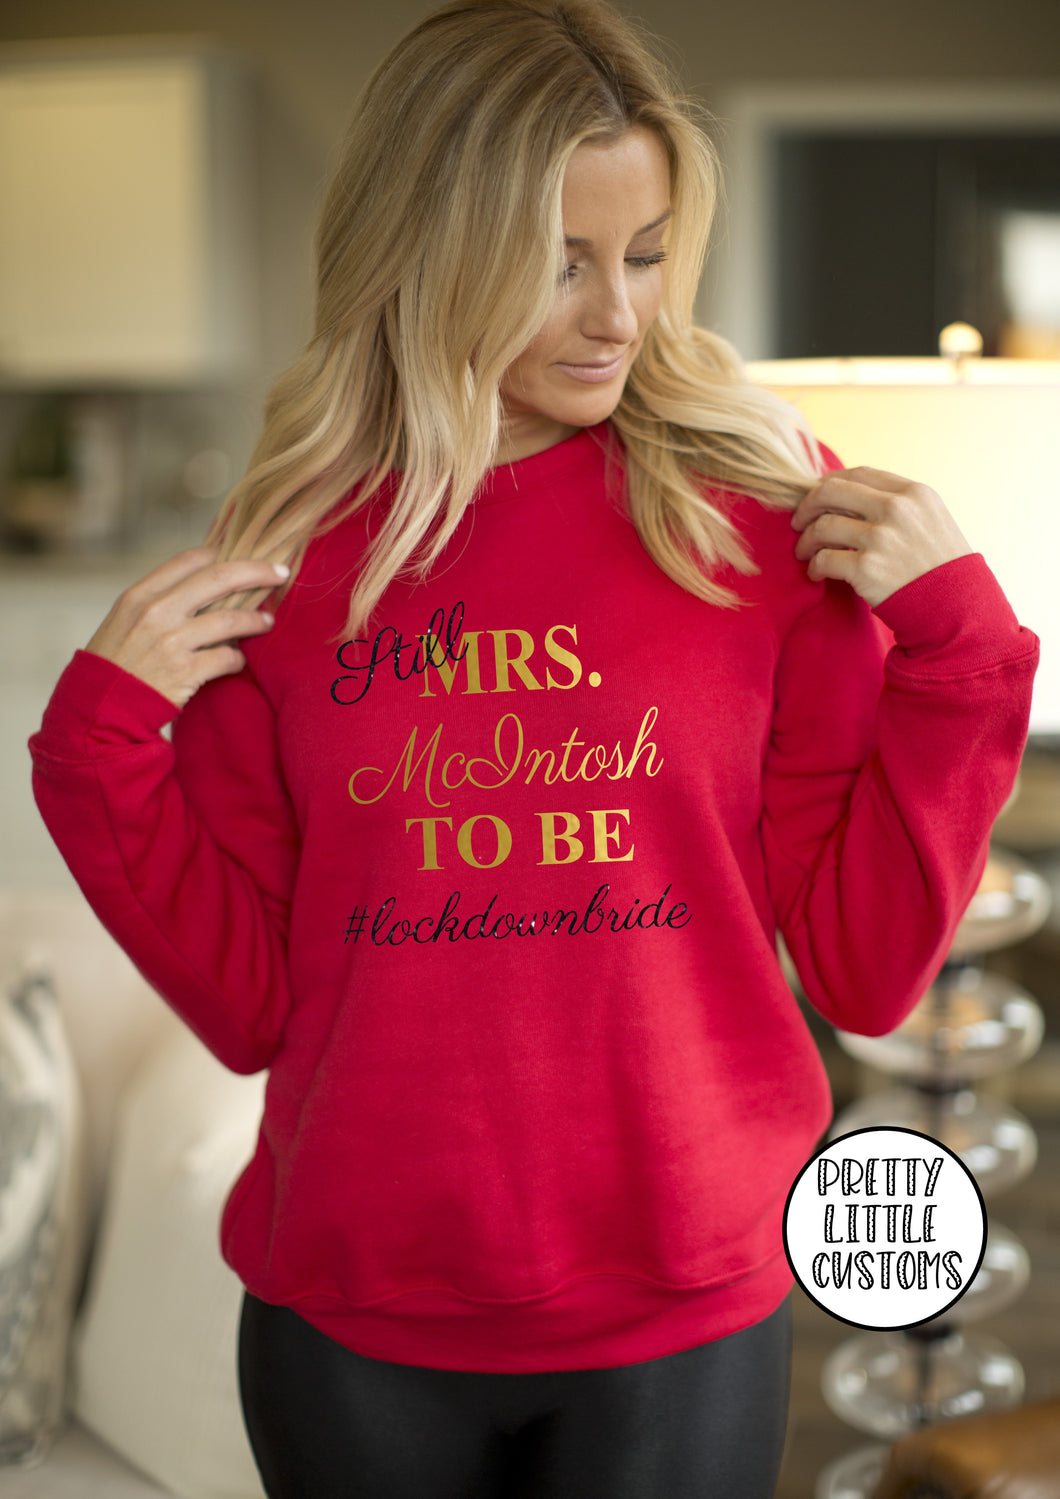 Still Mrs (your name) to be #lockdownbride commemorative sweater - red